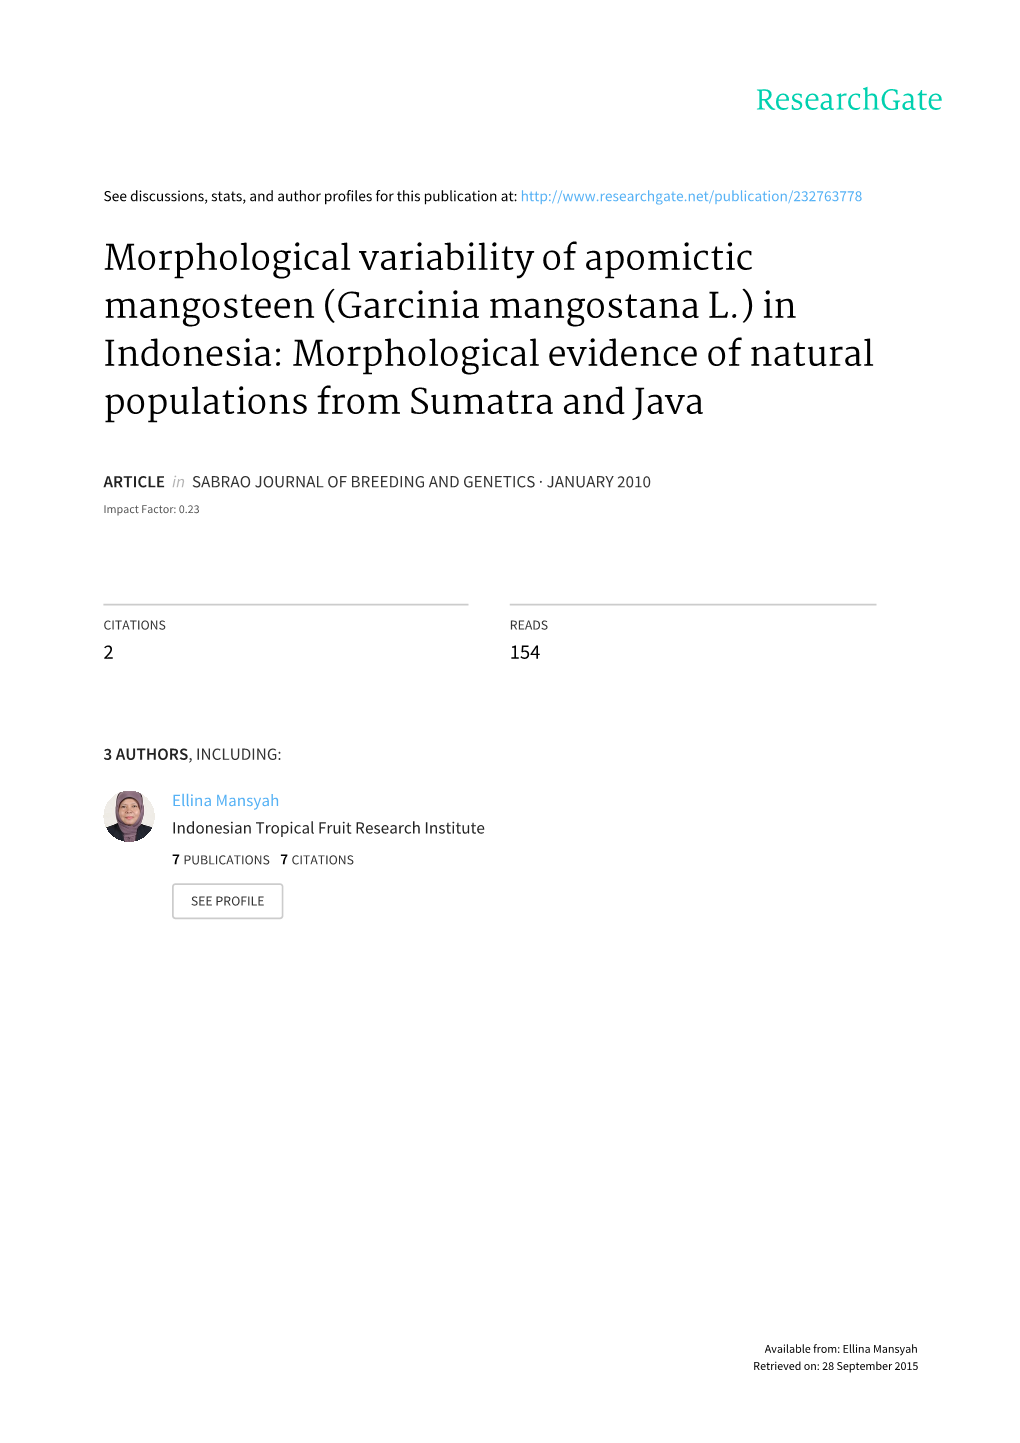 Morphological Variability of Apomictic Mangosteen (Garcinia Mangostana L.) in Indonesia: Morphological Evidence of Natural Populations from Sumatra and Java